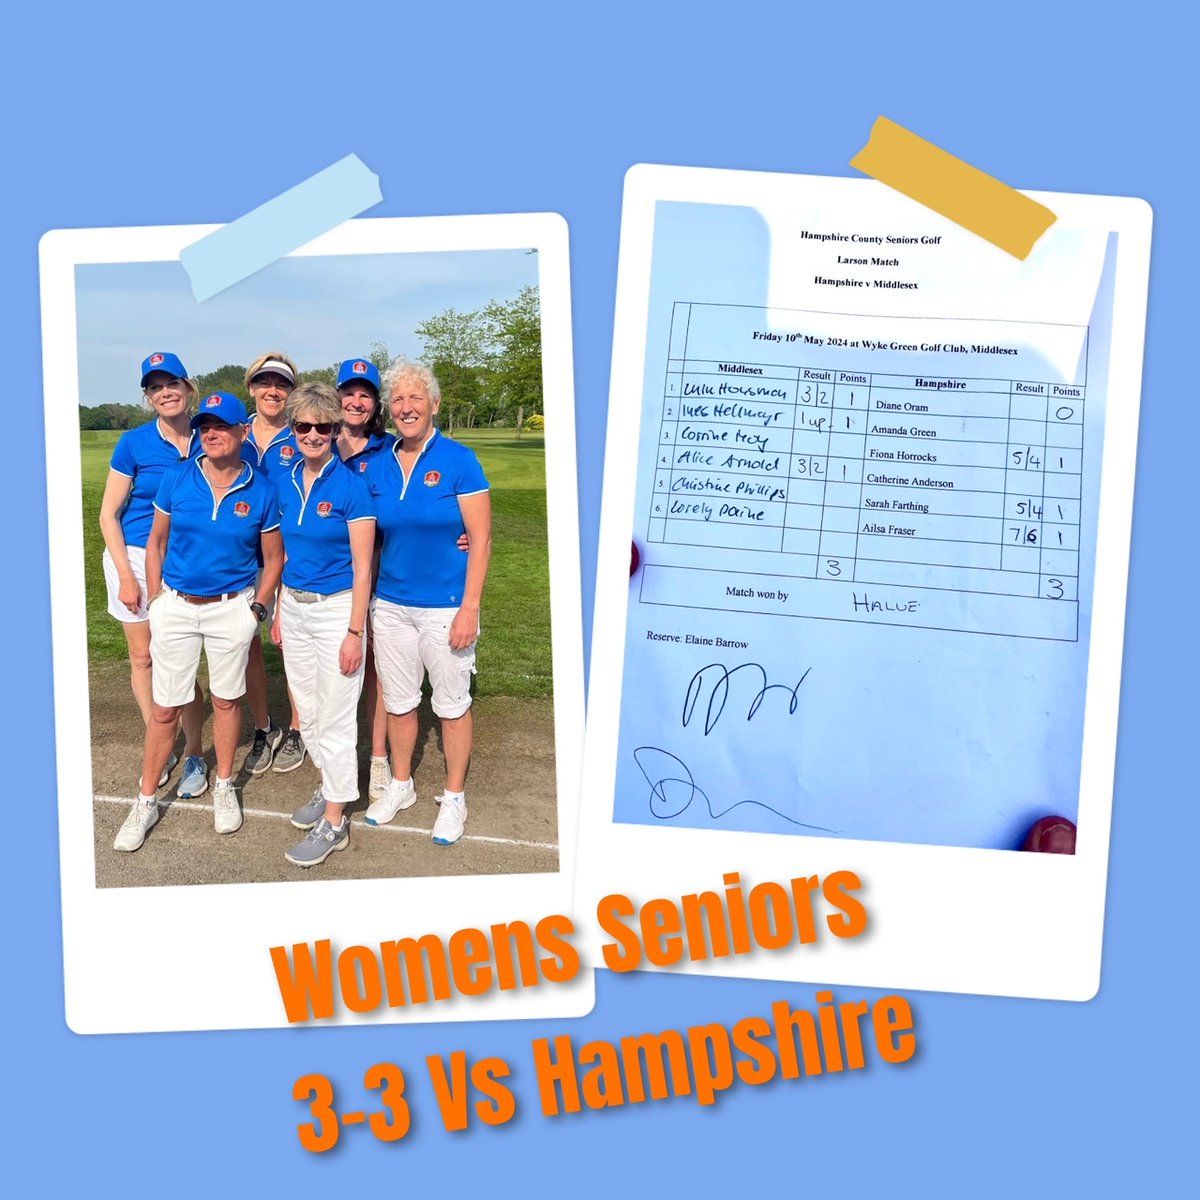 More results coming in to us.... This one from the Women's Senior team who had their first game Vs @HLGLadiesGolf Played at @WykeGreenGC - honours were even in a closely contested match 3⃣-3⃣ was the close of play scoreline 🏌️‍♀️ Let's hope for more 🌞on the golf course ⛳️